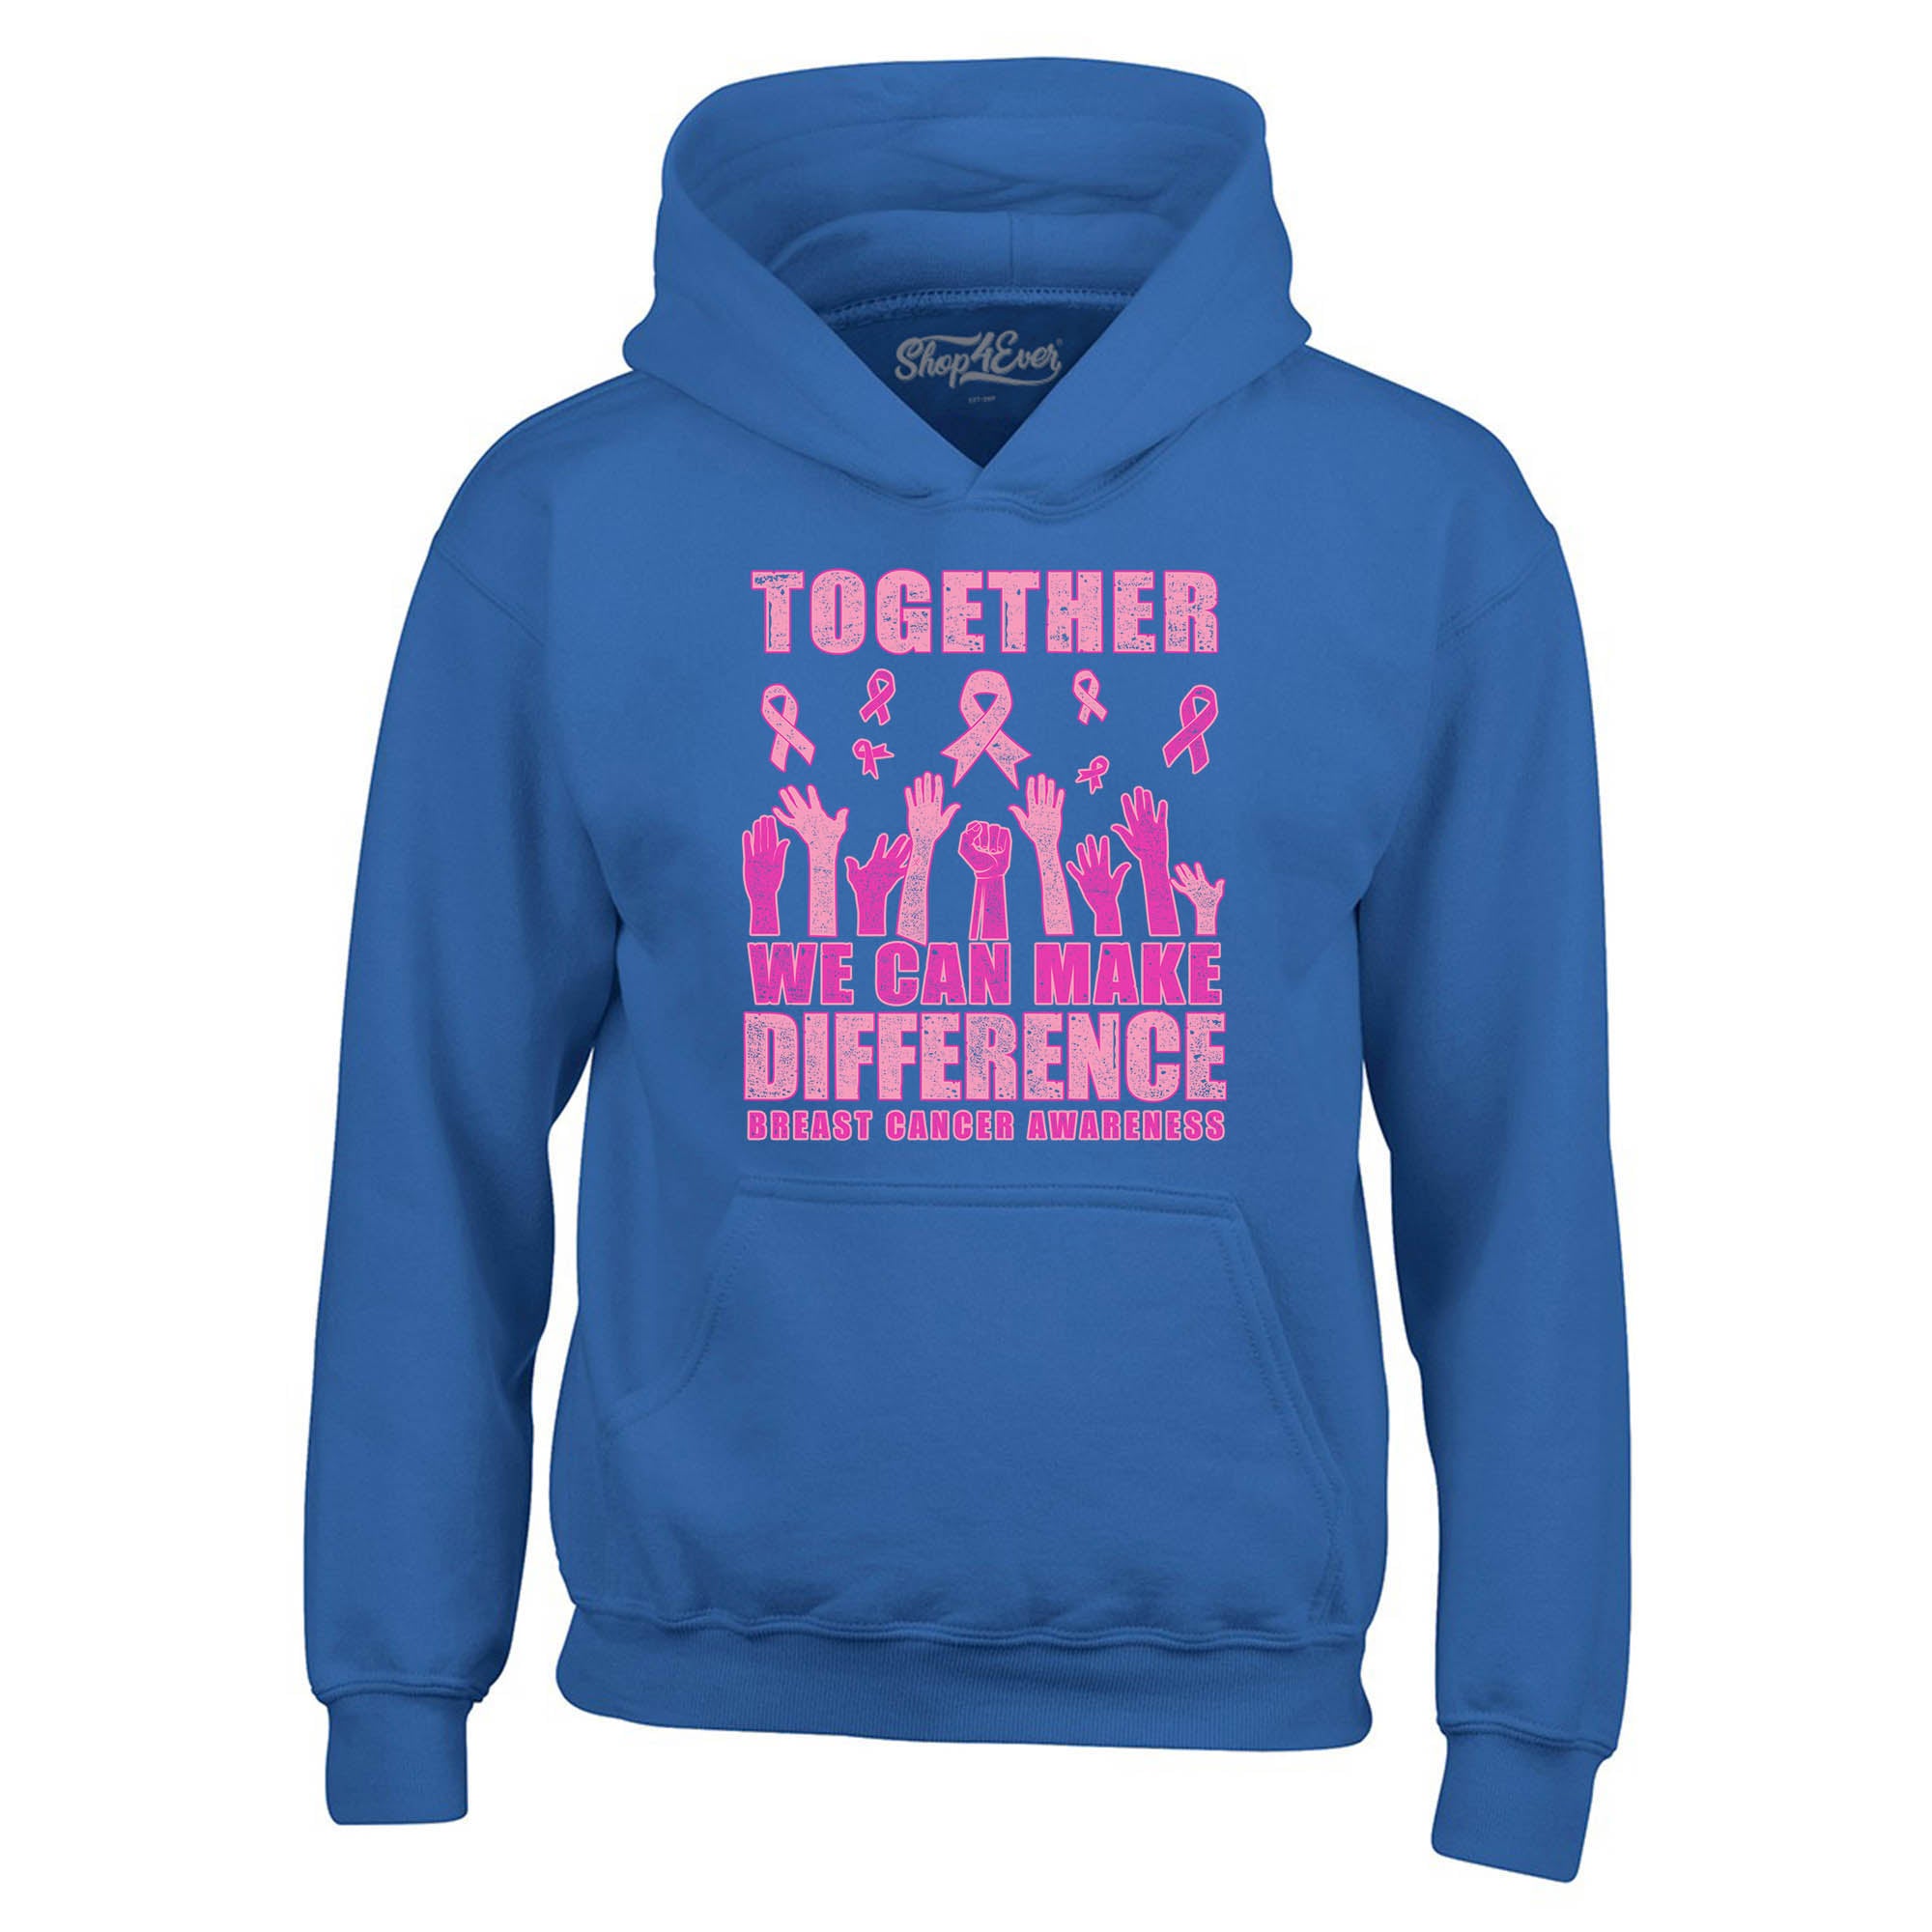 Together We Can Make A Difference Breast Cancer Awareness Hoodie Sweatshirts